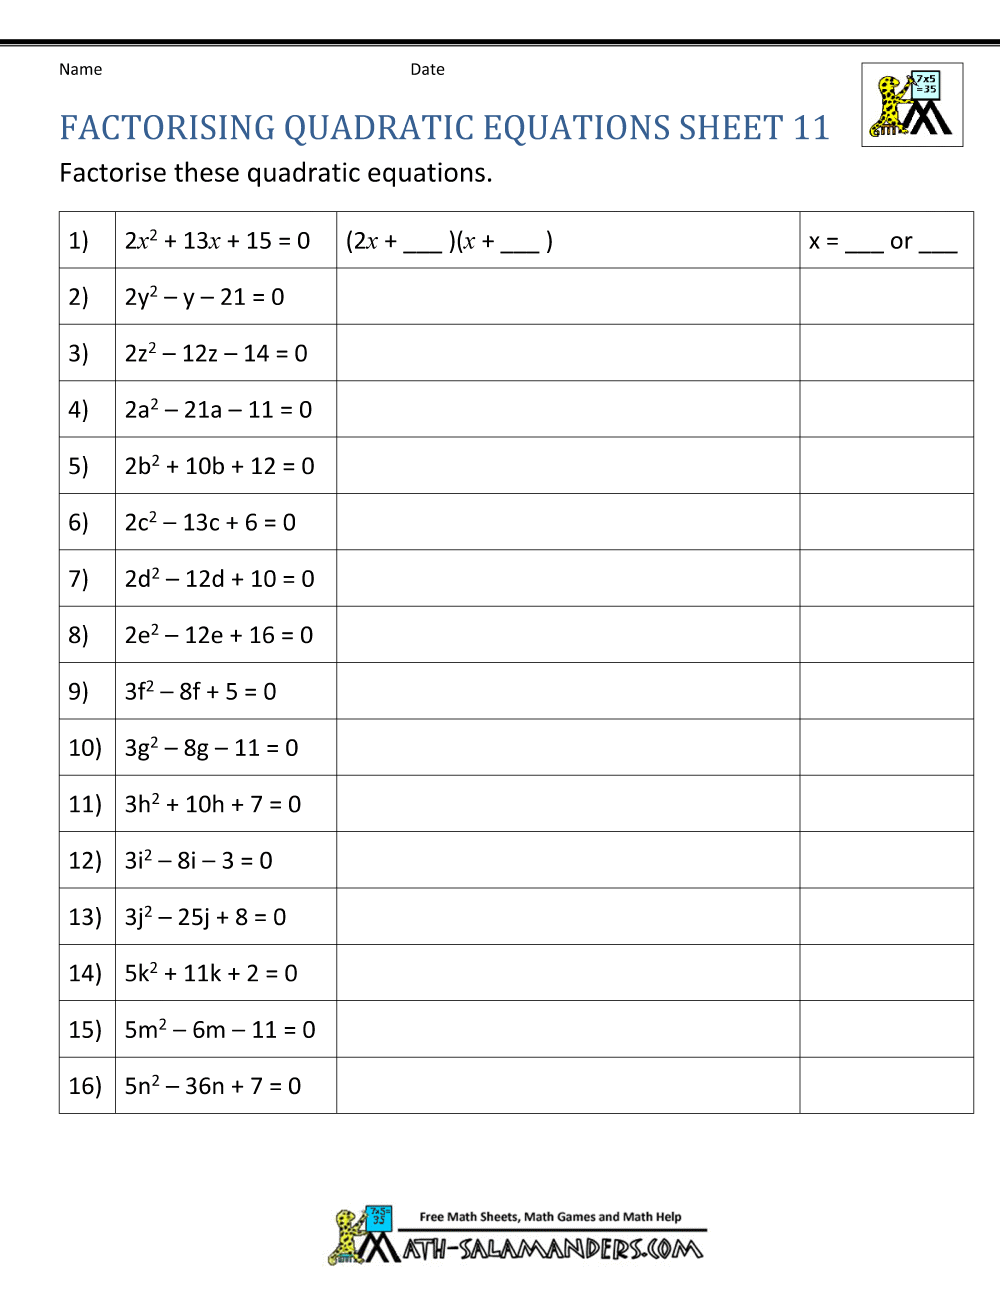 Factoring Quadratic Equations With Regard To Factoring Special Cases Worksheet